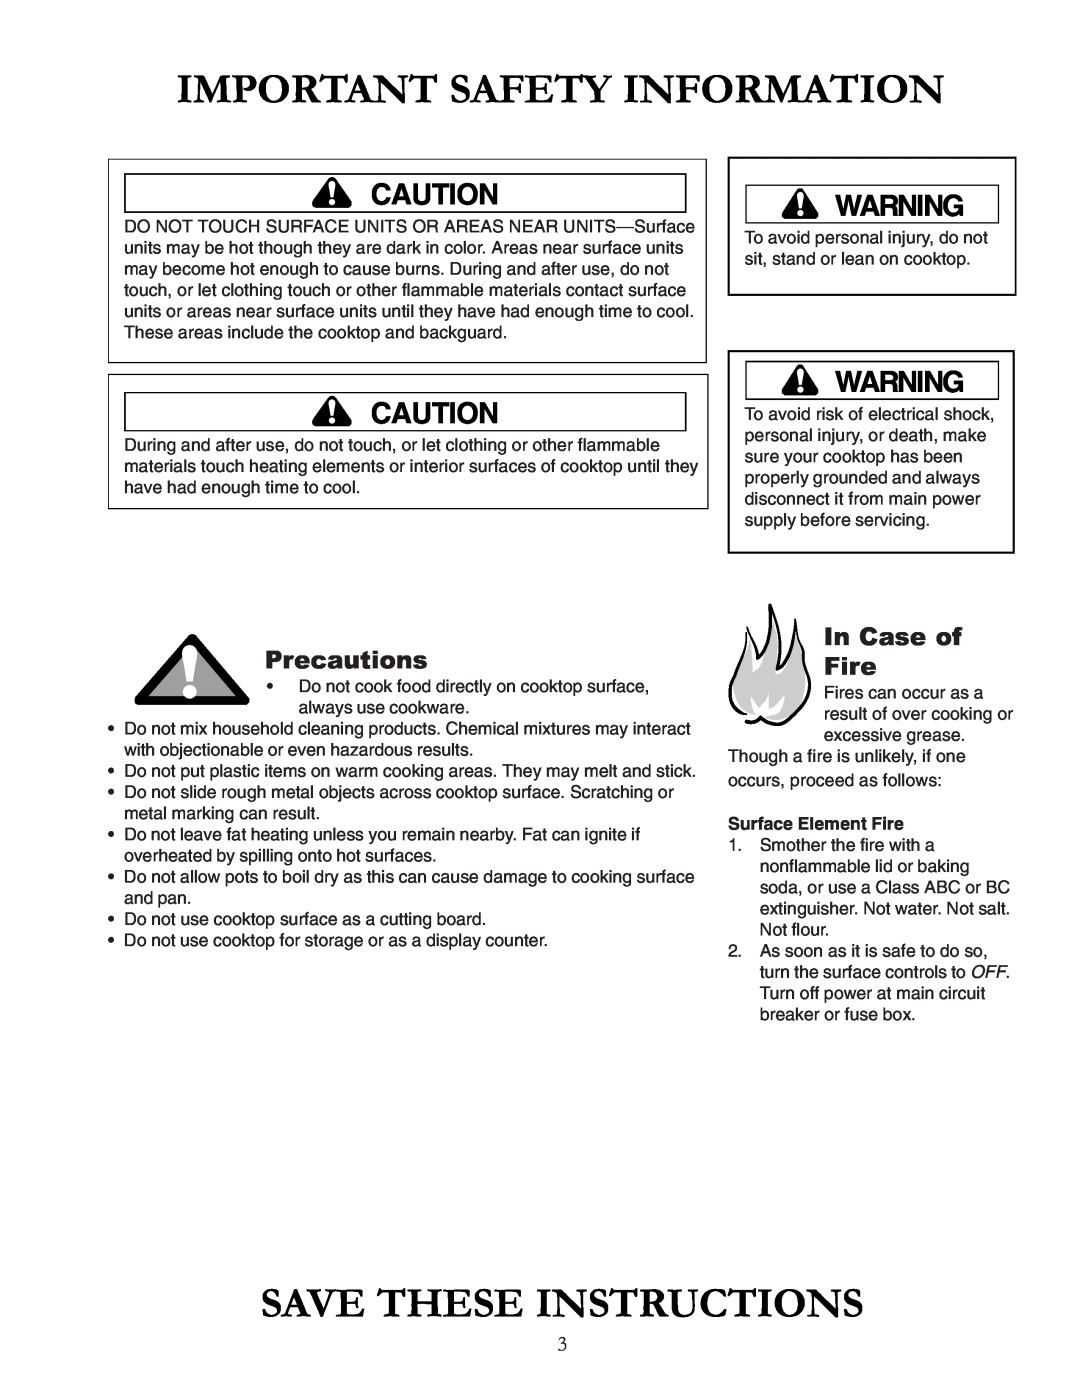 Cook Manufacturing akt3630, akt3650 Important Safety Information, Save These Instructions, Precautions, In Case of Fire 